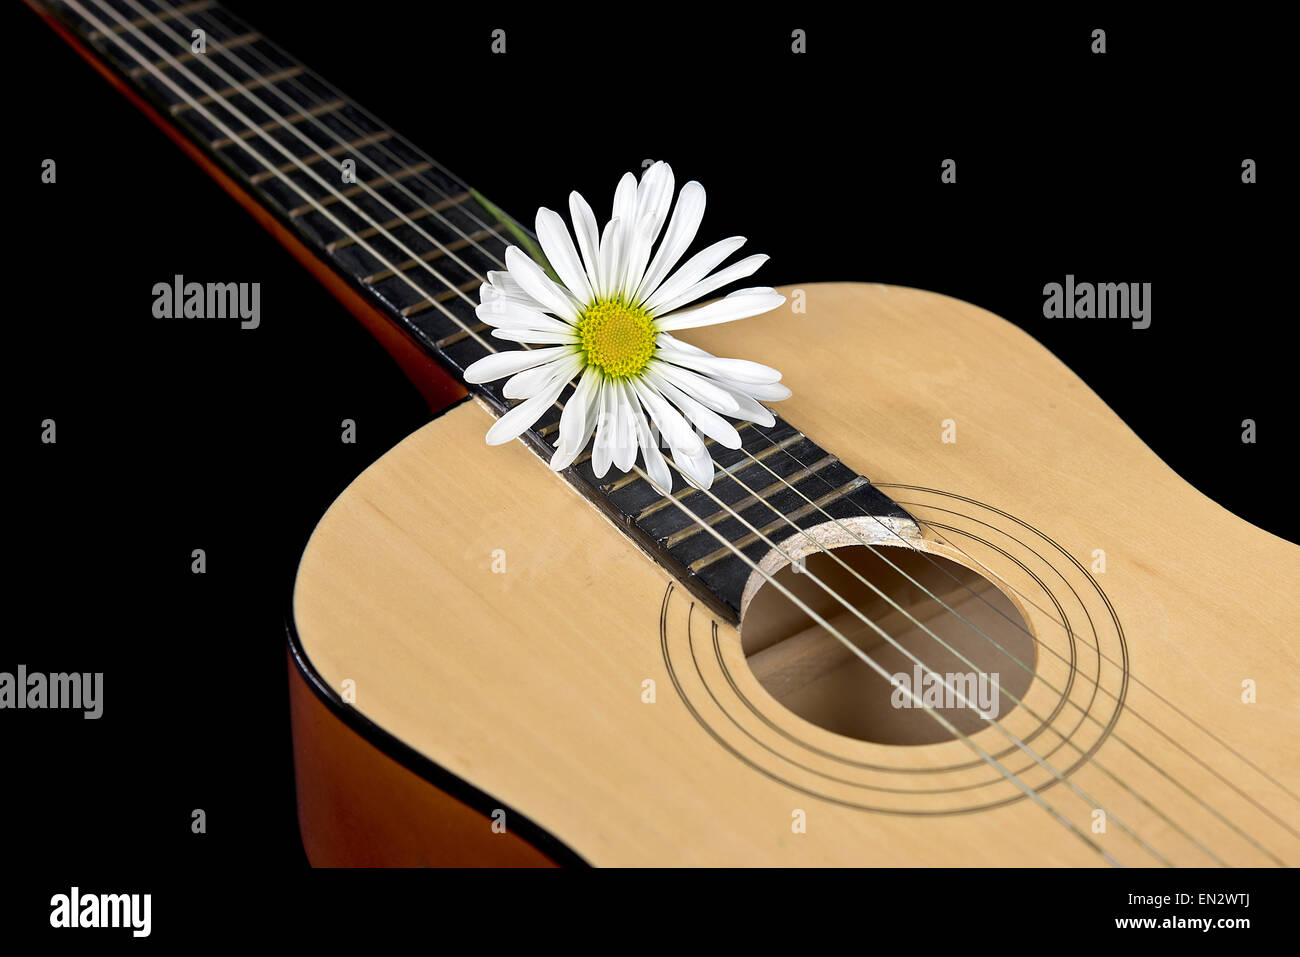 Six string guitar on black with single white daisy. Stock Photo